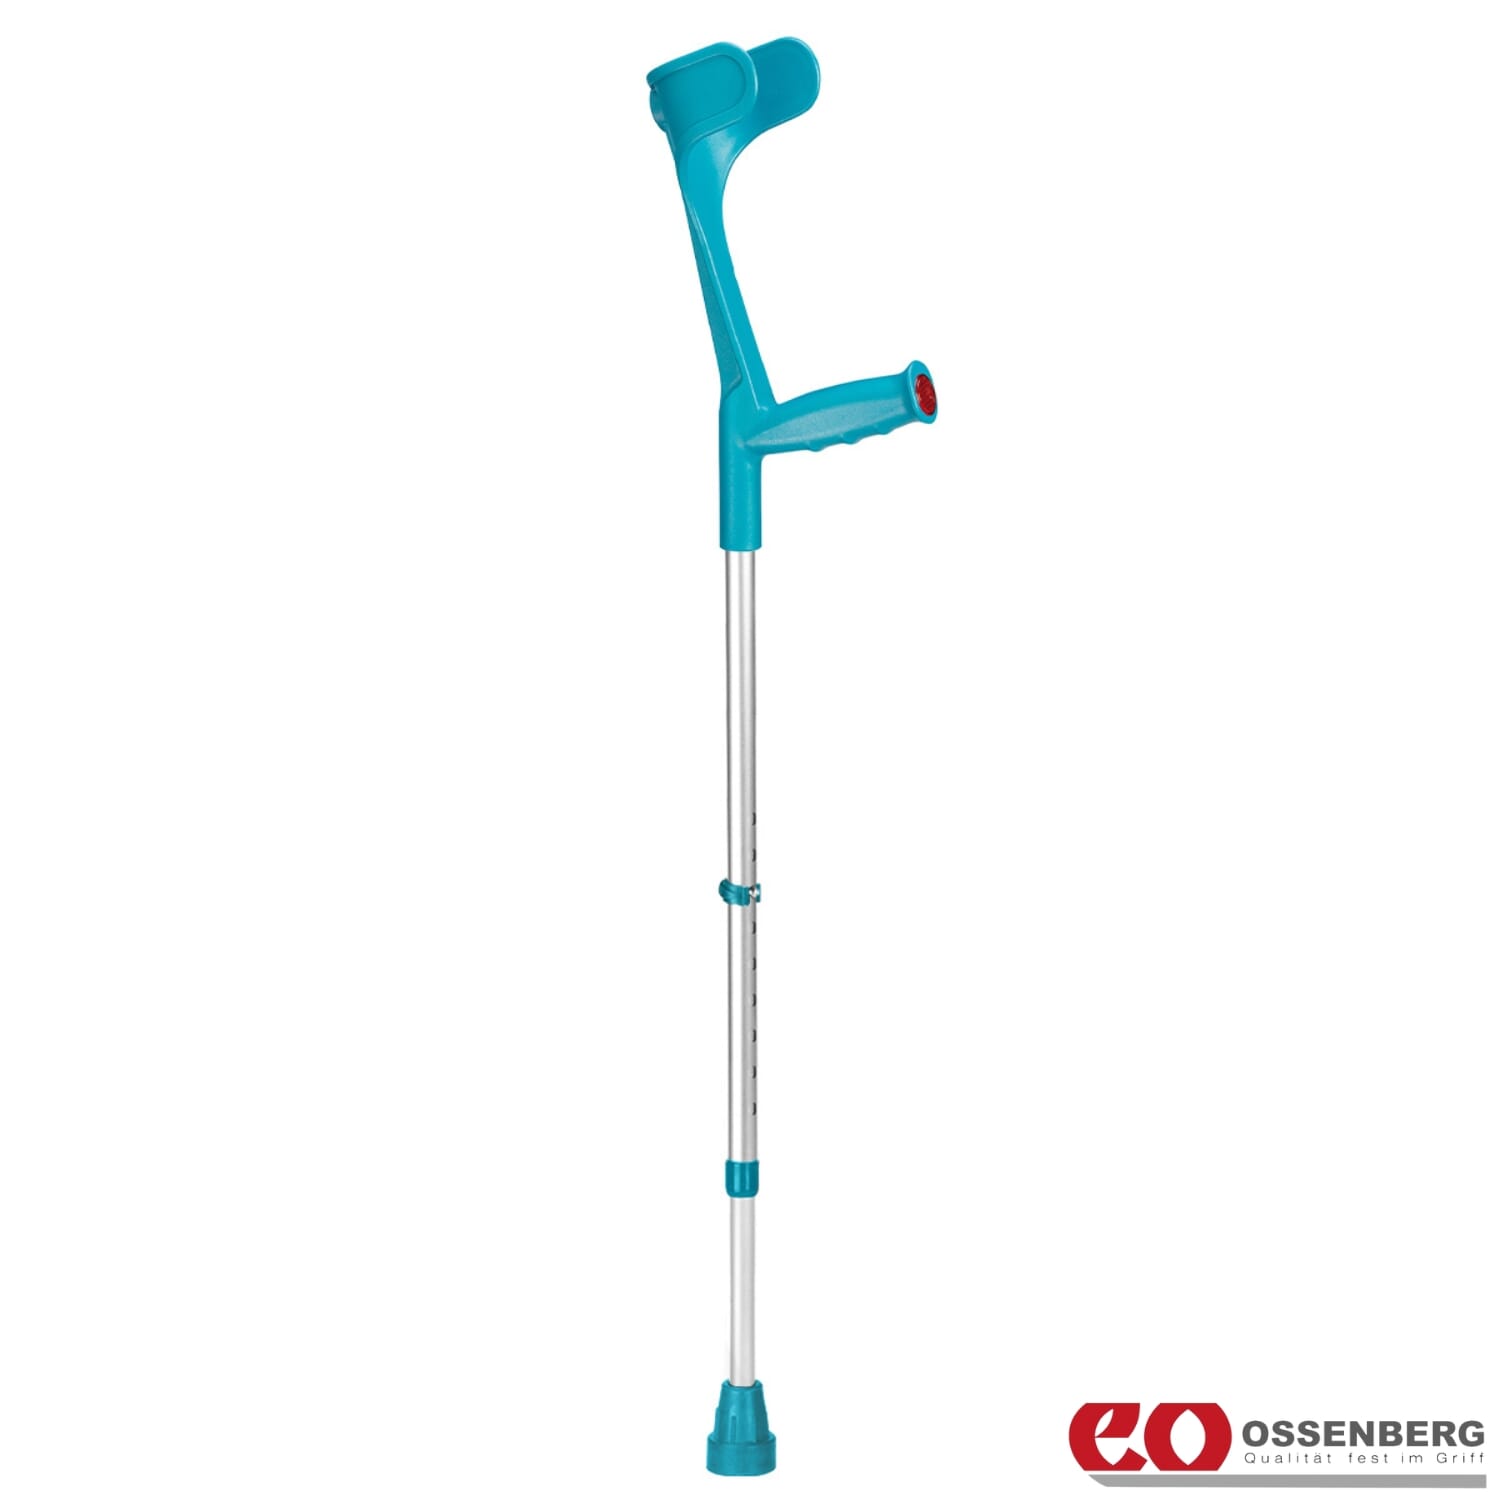 View Ossenberg Open Cuff Crutches Turquoise Single information